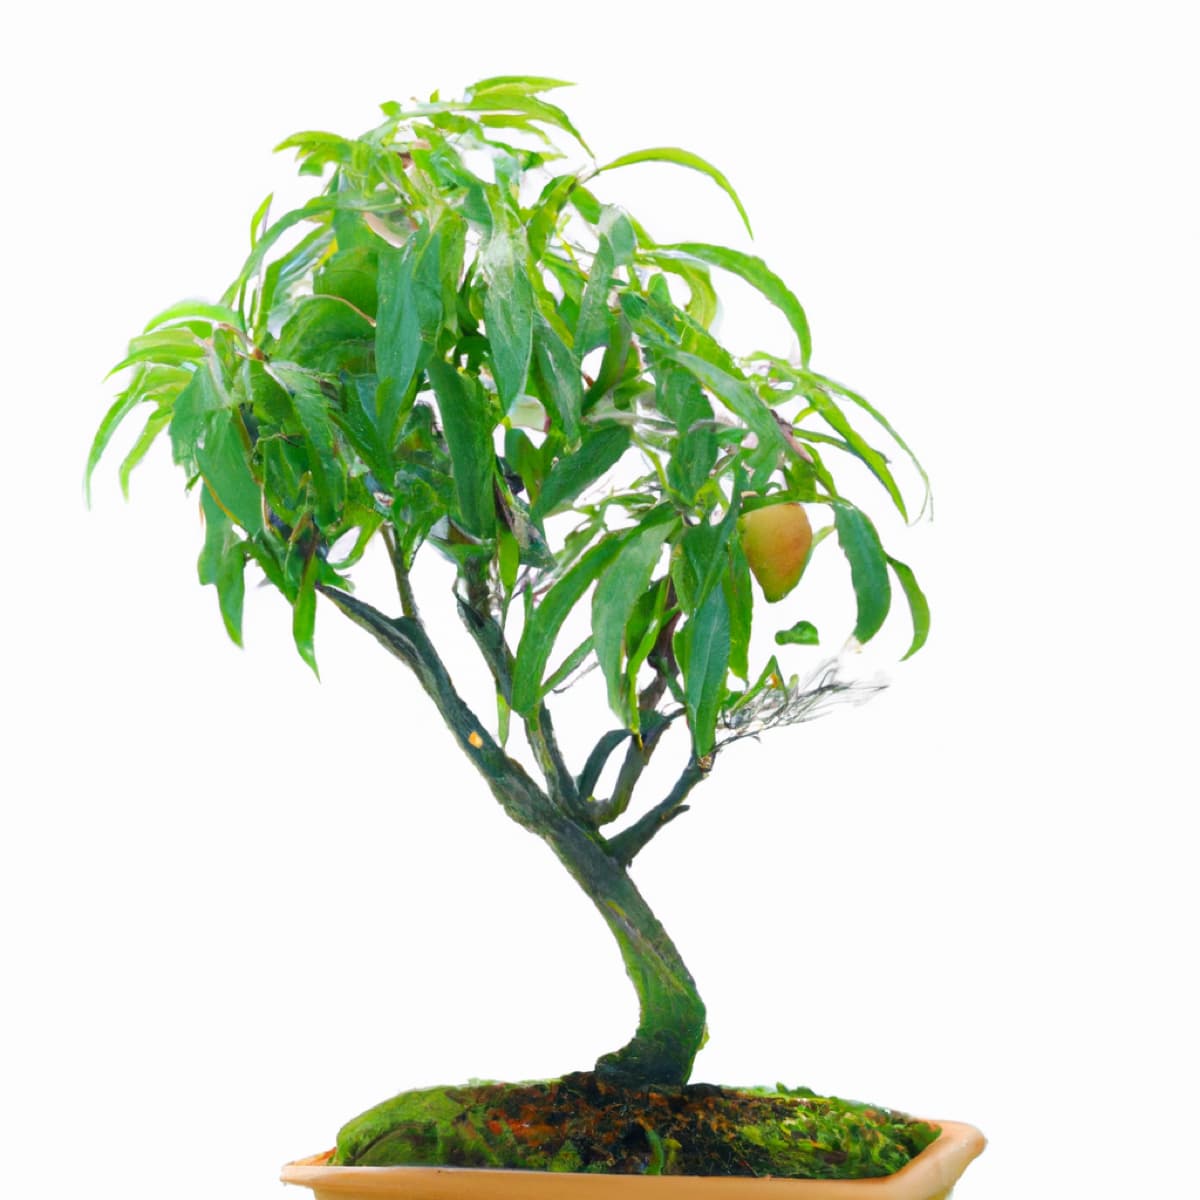 How to Grow and Care for Mango Bonsai